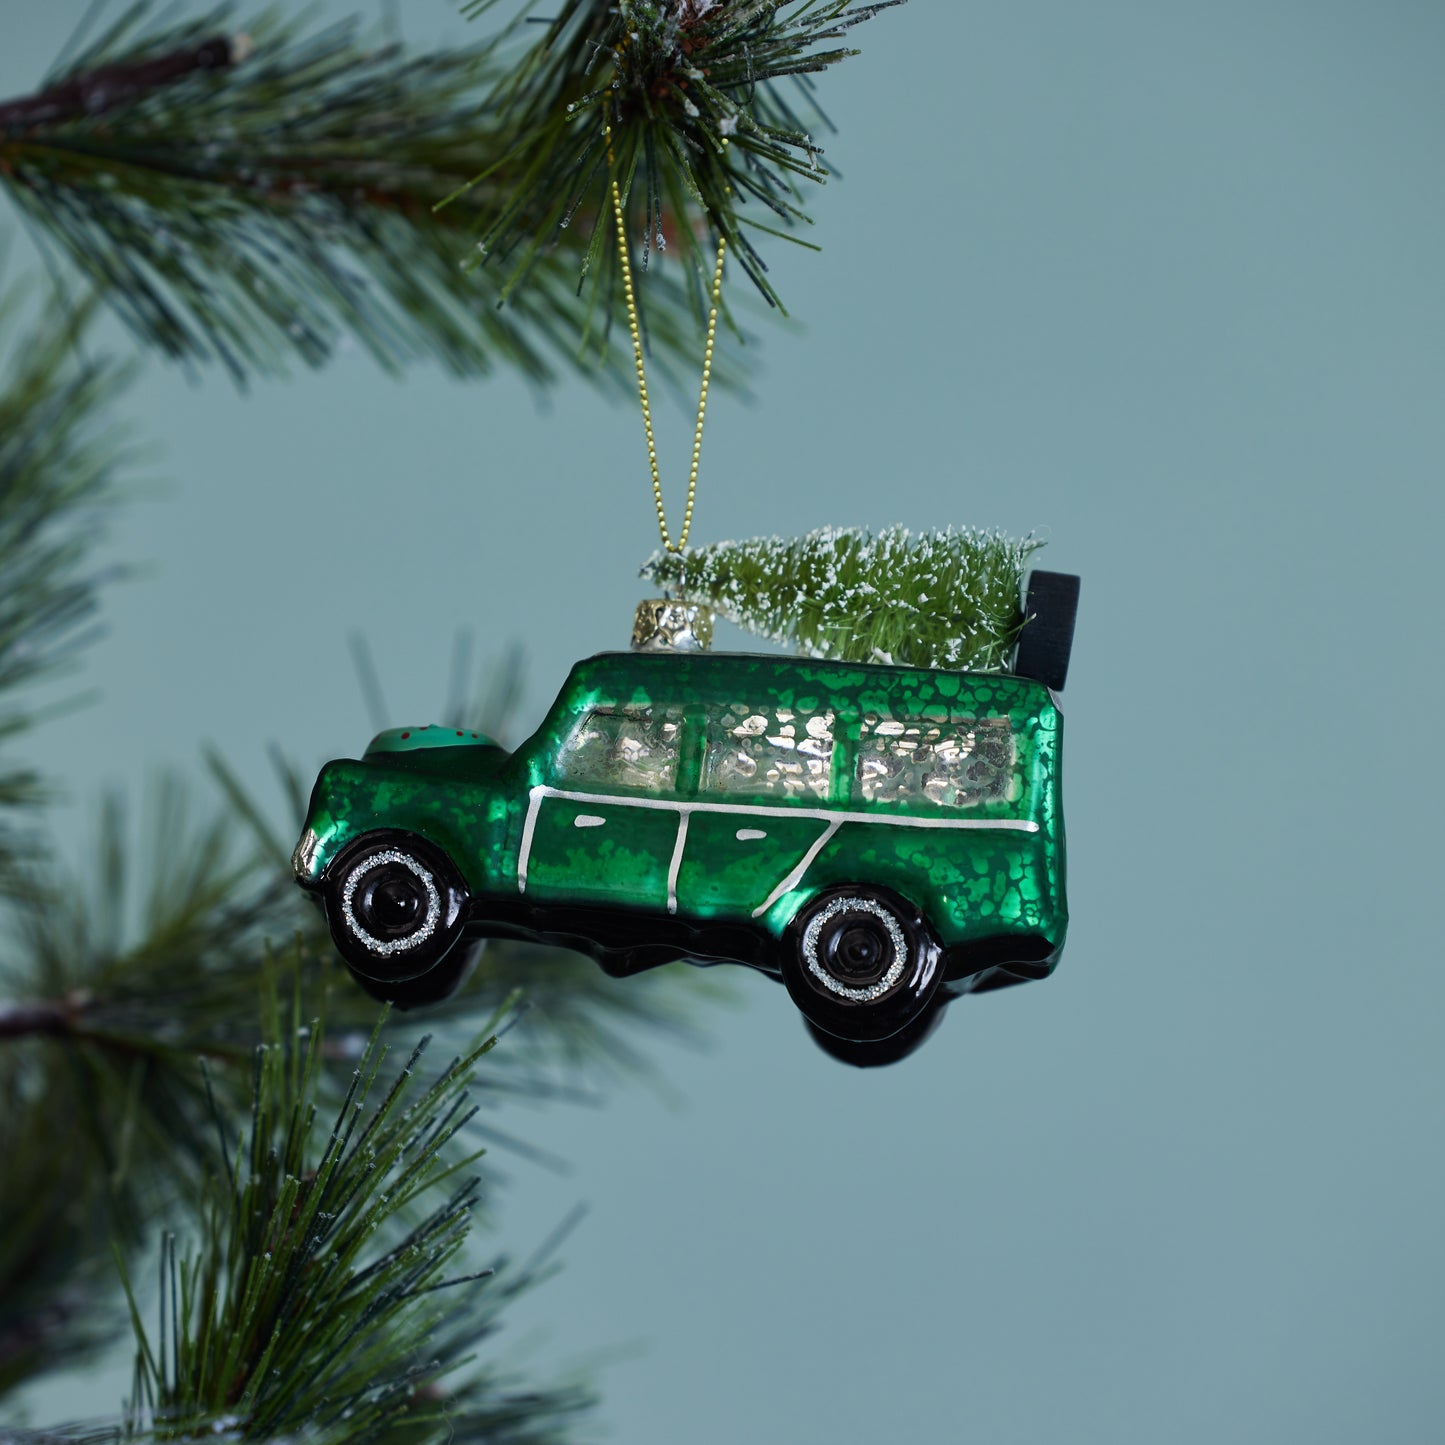 Hand-Painted Glass Vintage Vehicle Ornament